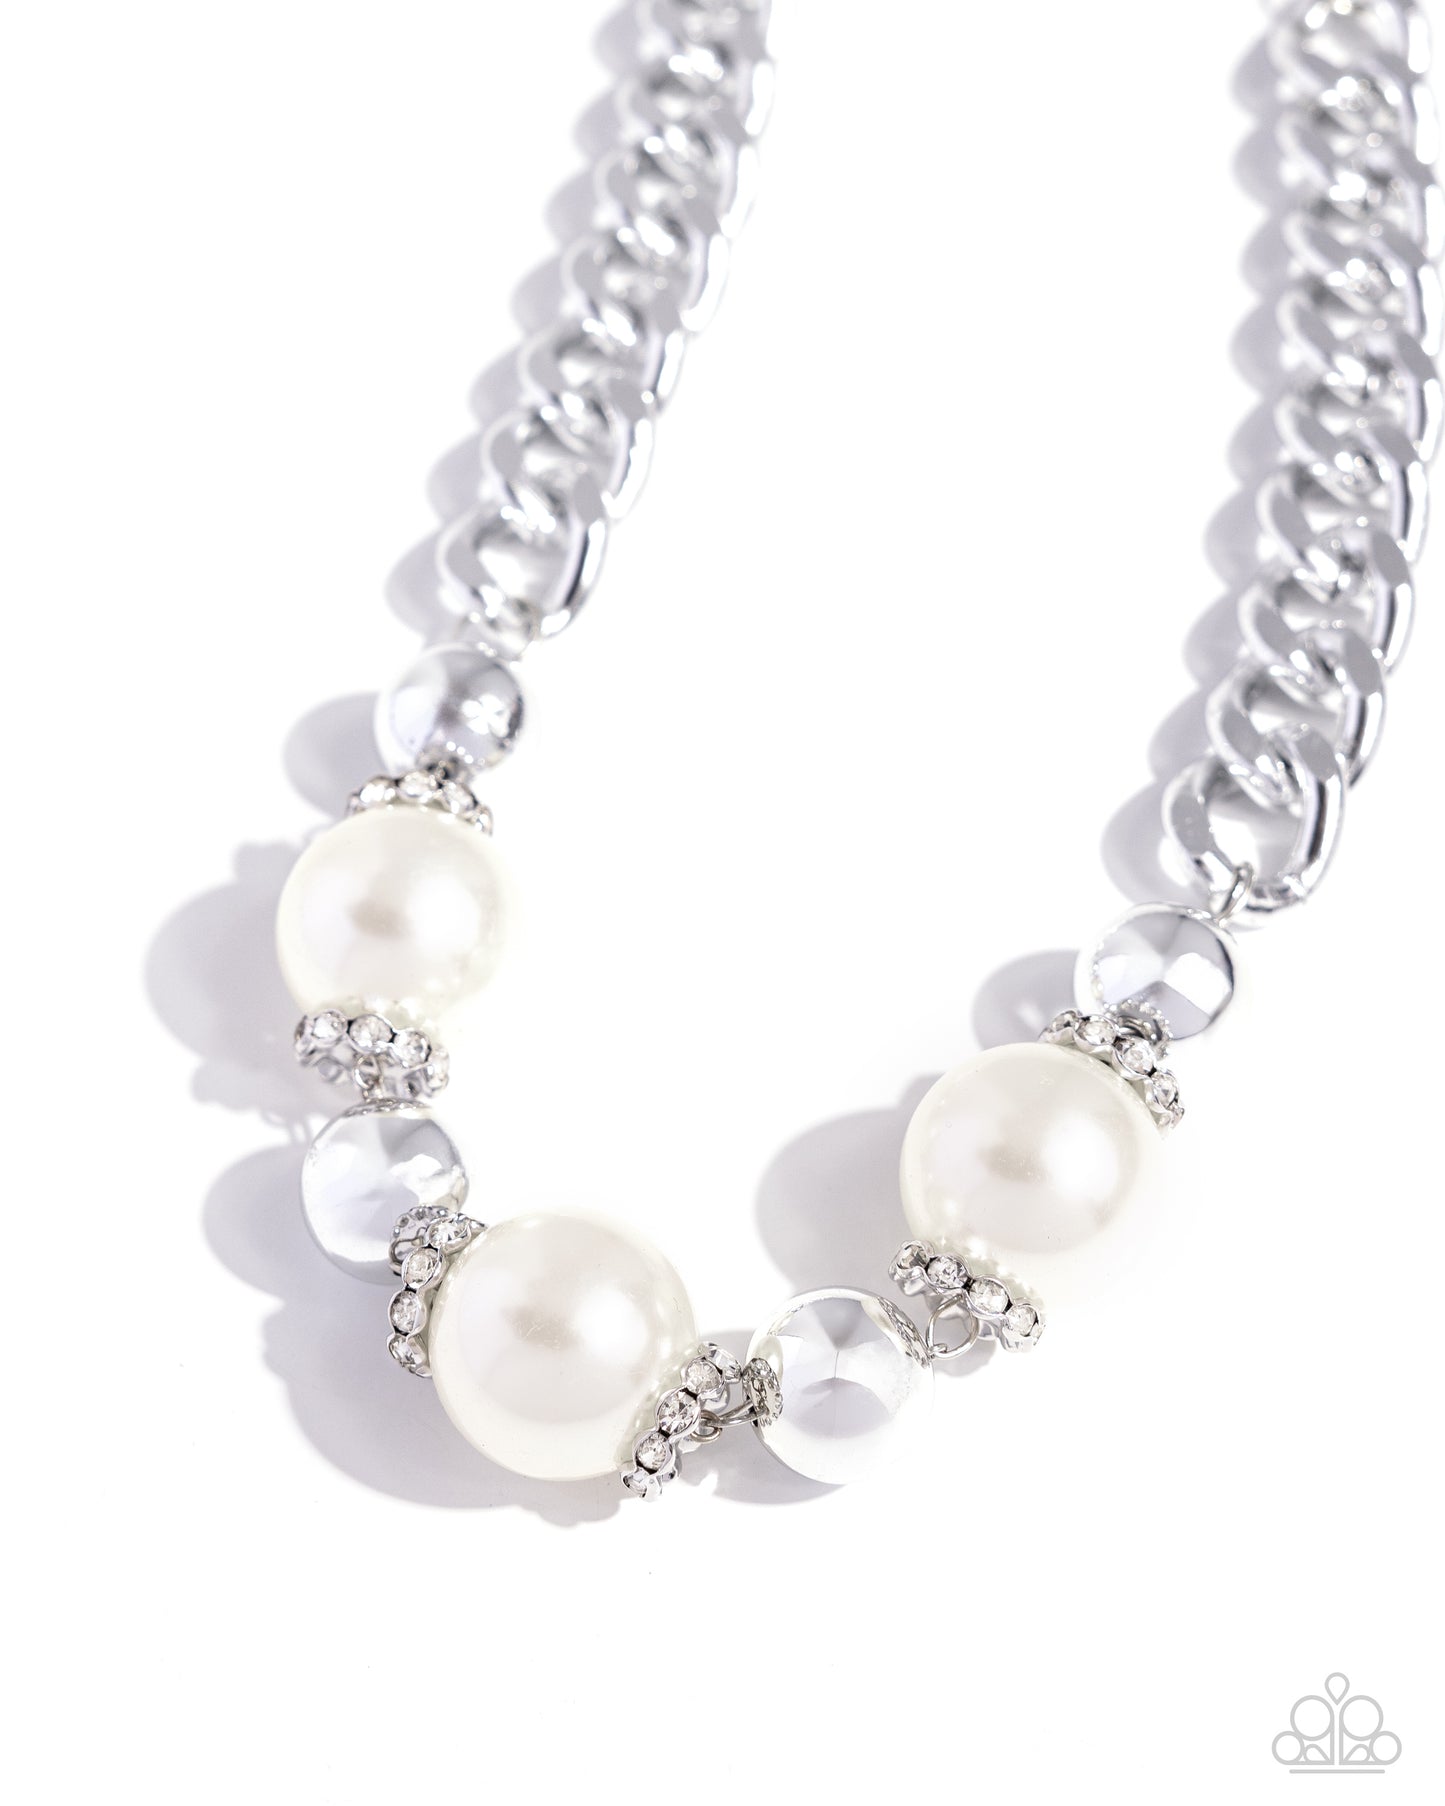 Oversized, high-sheen silver curb chain links gives way to a collection of oversized white pearls, silver beads, and white rhinestone-encrusted silver rings for a glamorously glossy look. Features an adjustable clasp closure.  Sold as one individual necklace. Includes one pair of matching earrings.